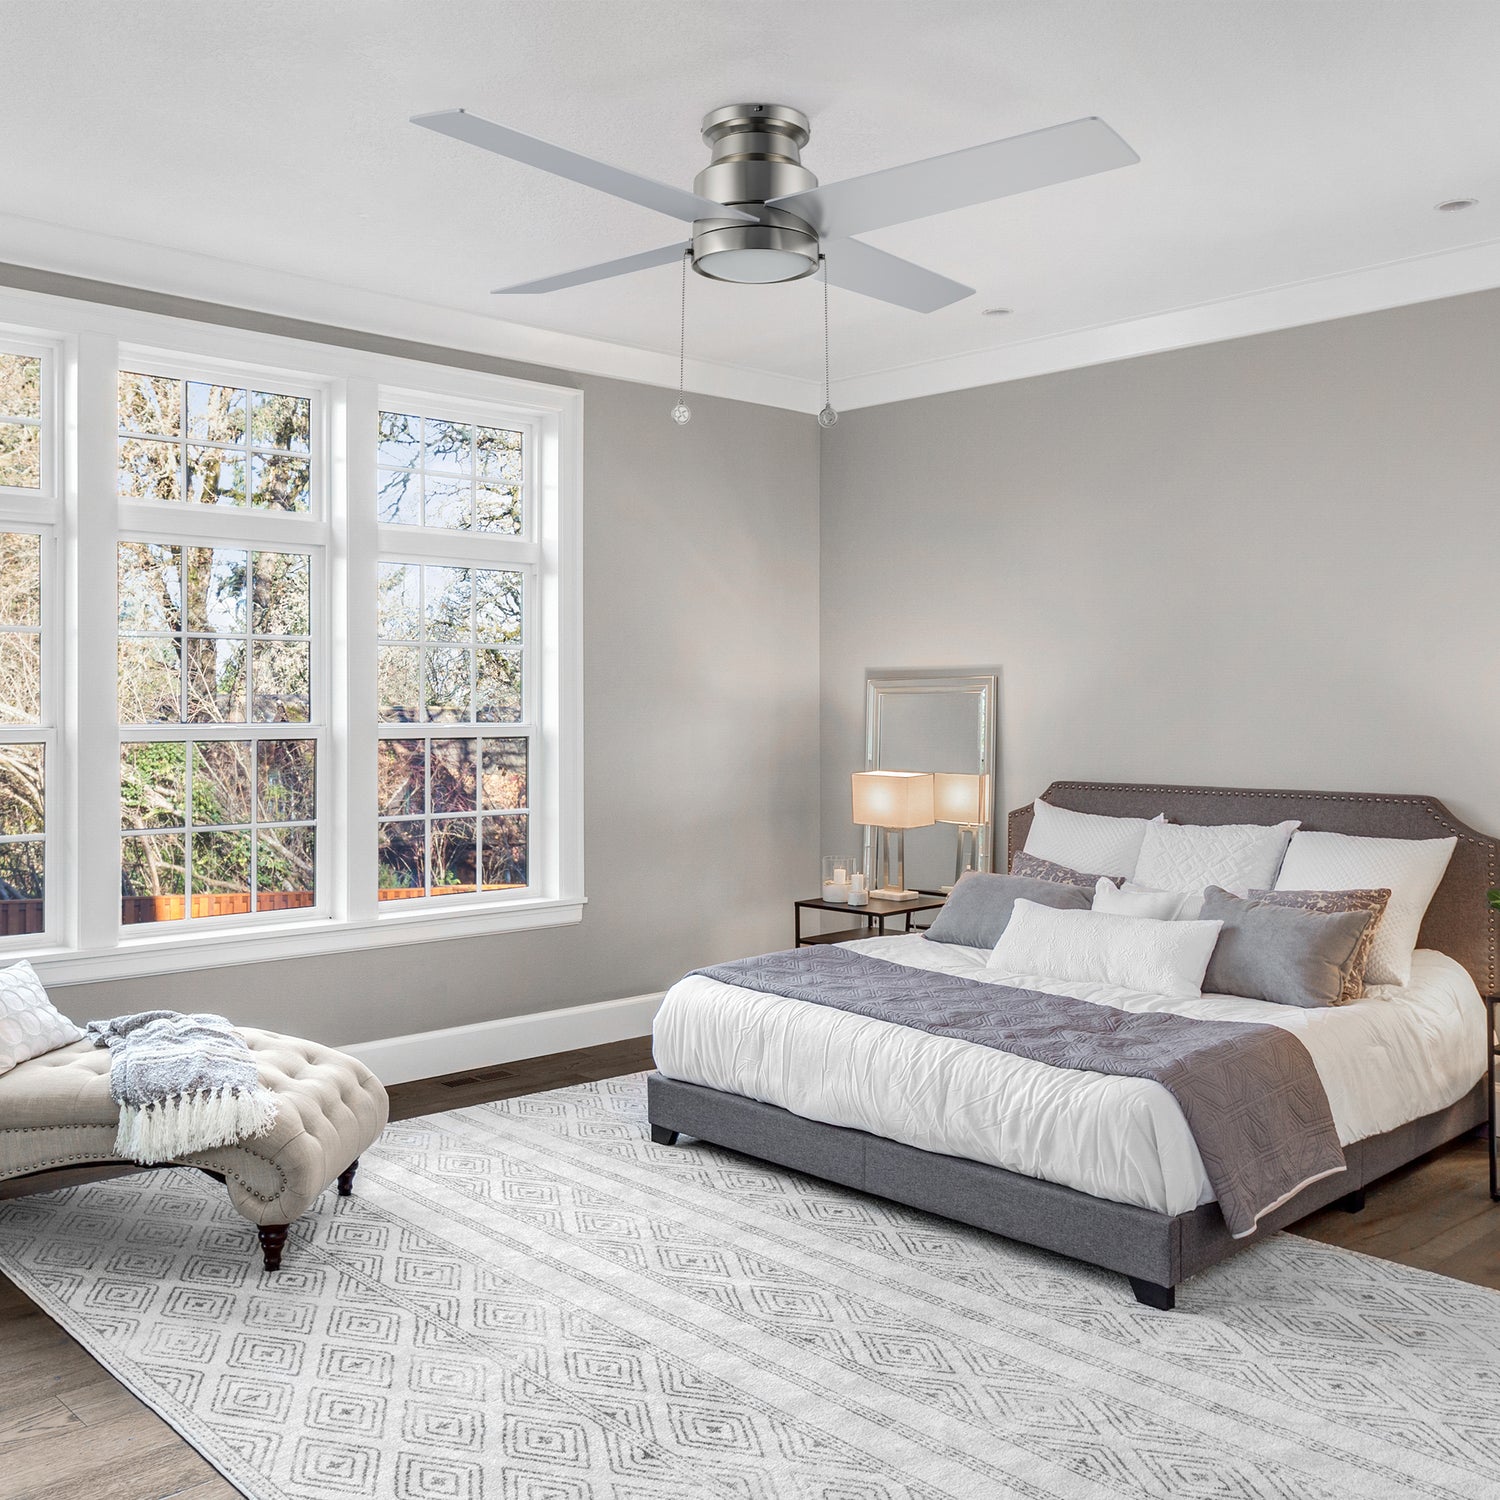 Carro Smafan Luft 52-inch modern ceiling fan with an LED light, featuring a sleek silver finish and 4 Polywood blades, elegantly displayed in a stylish bedroom setting.